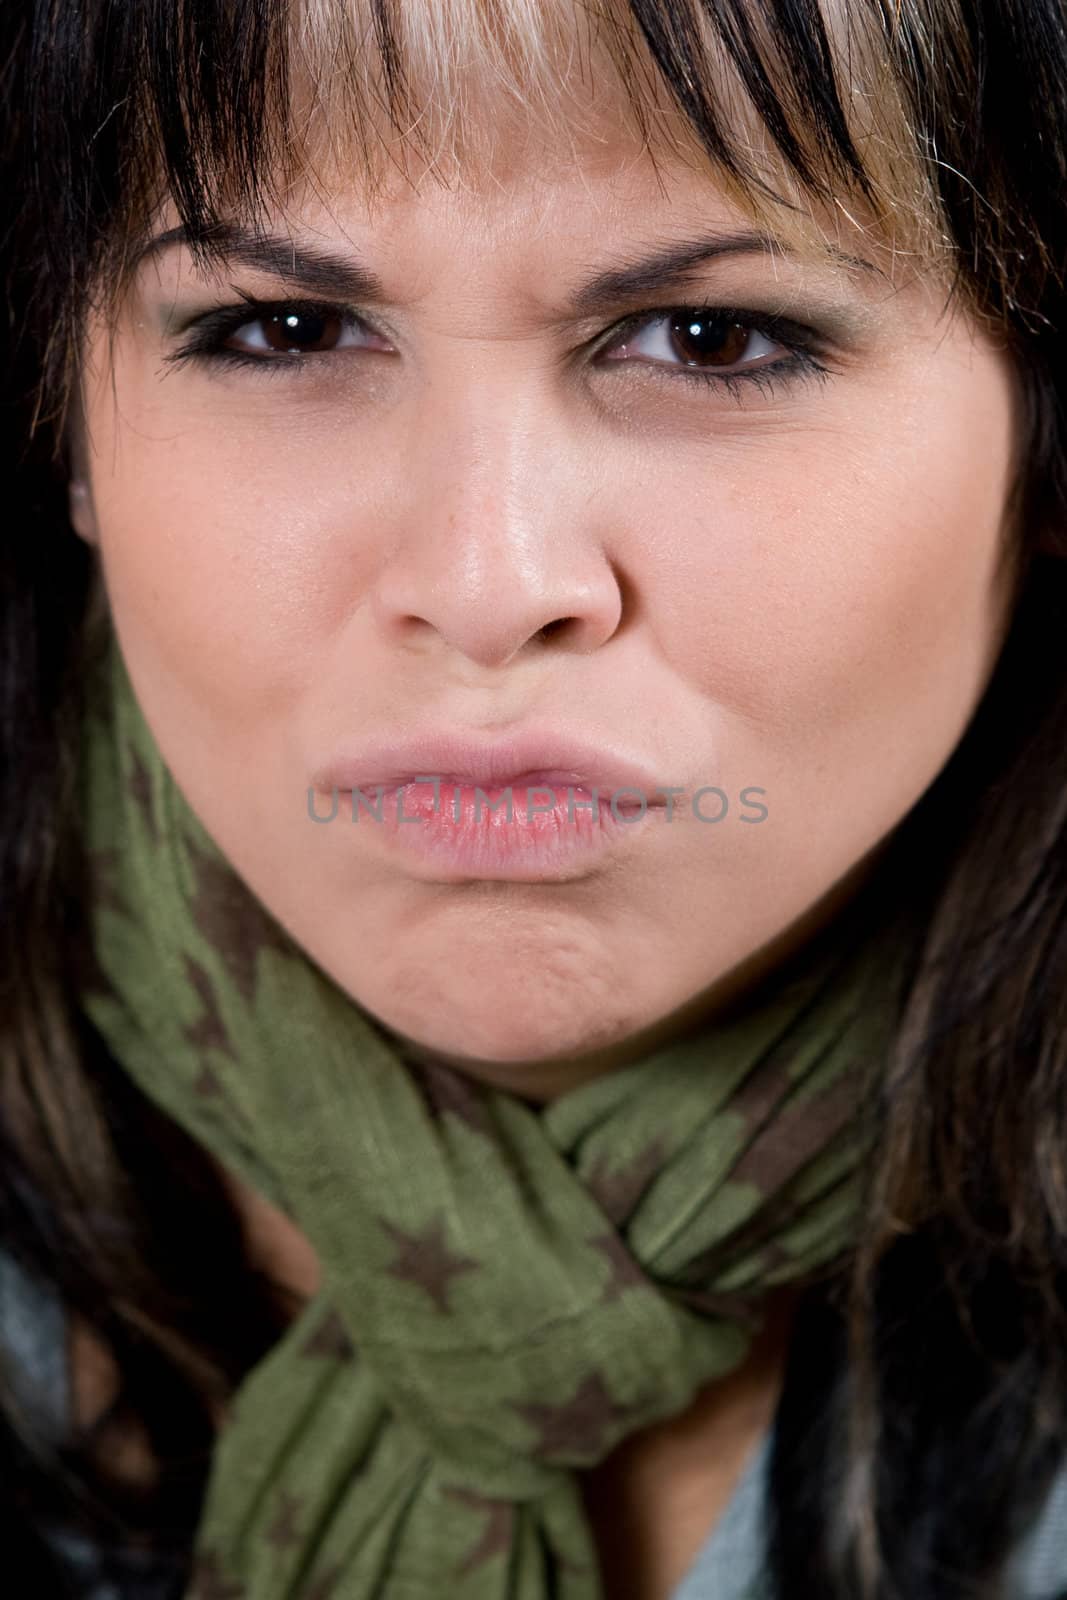 A young woman making a funny face with her lips puckered.